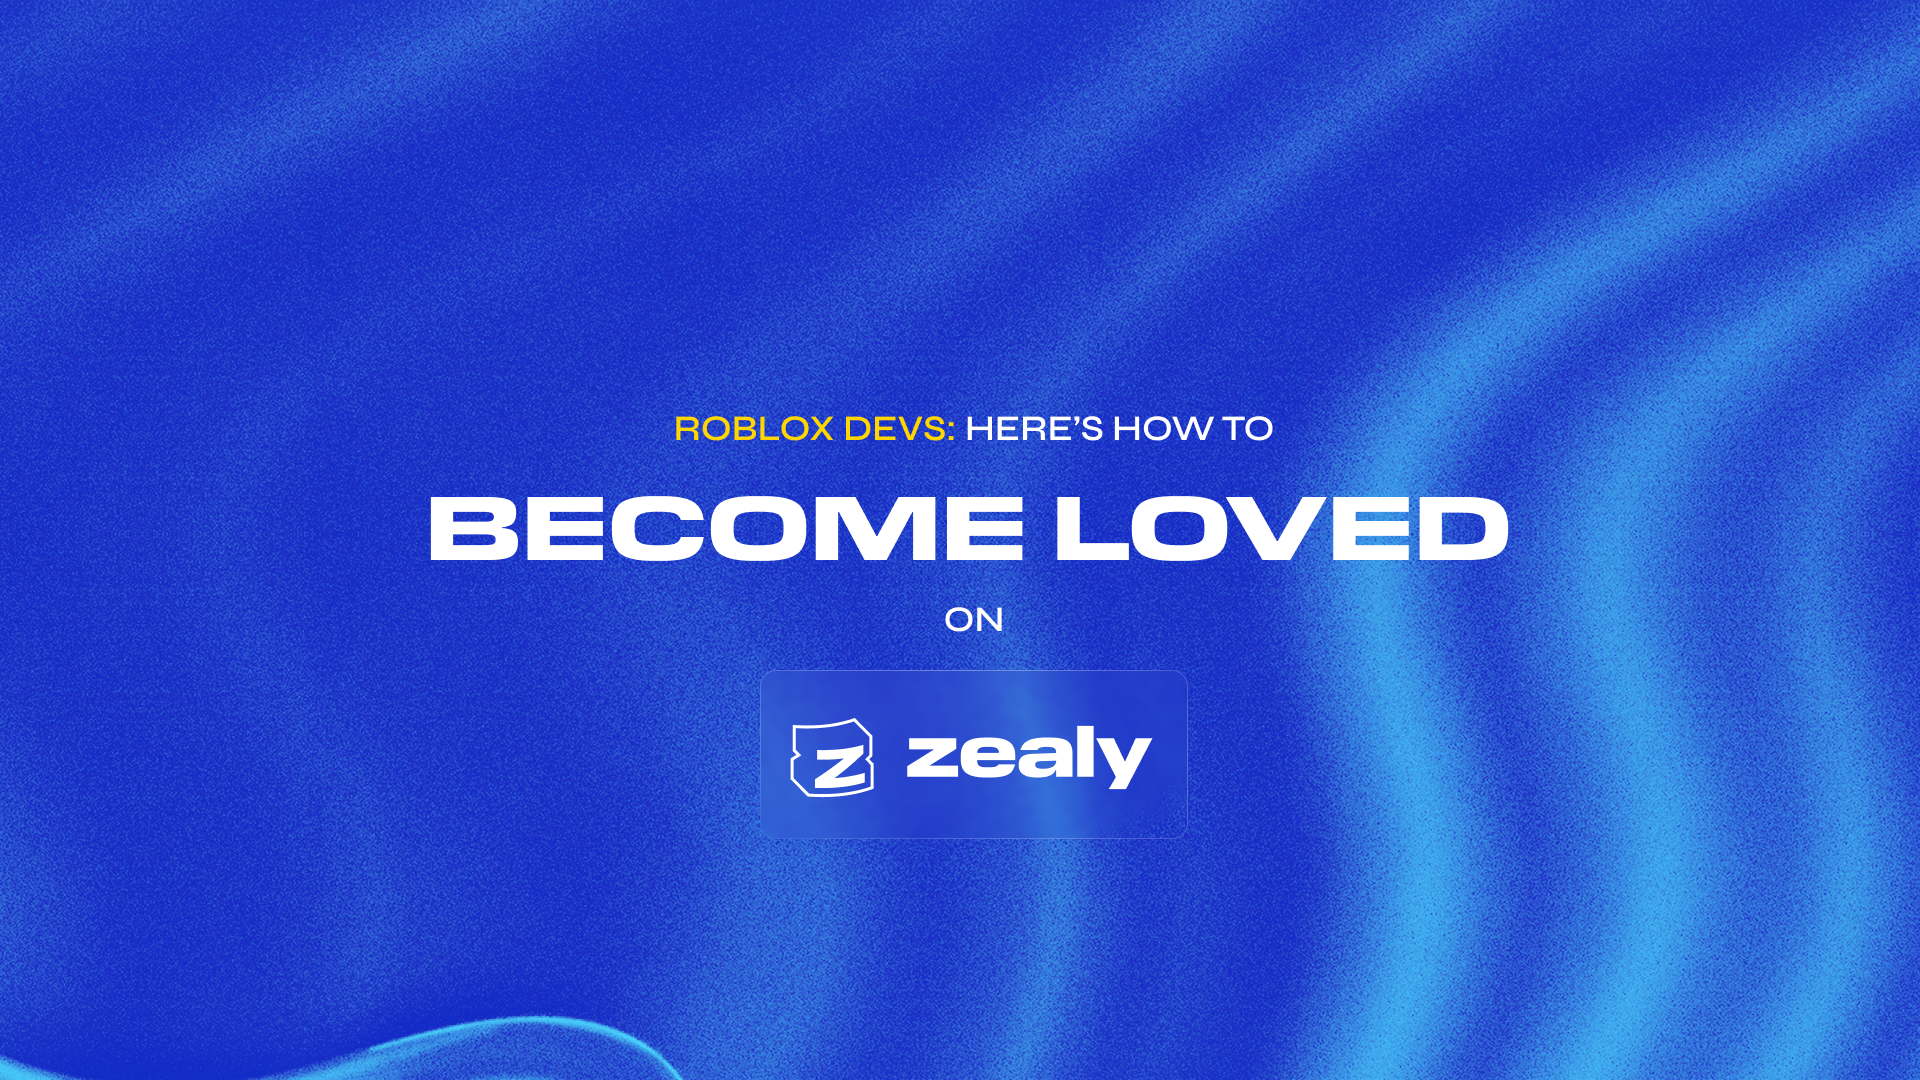 Roblox Devs: Become Loved on Zealy (Part 3 of 3)